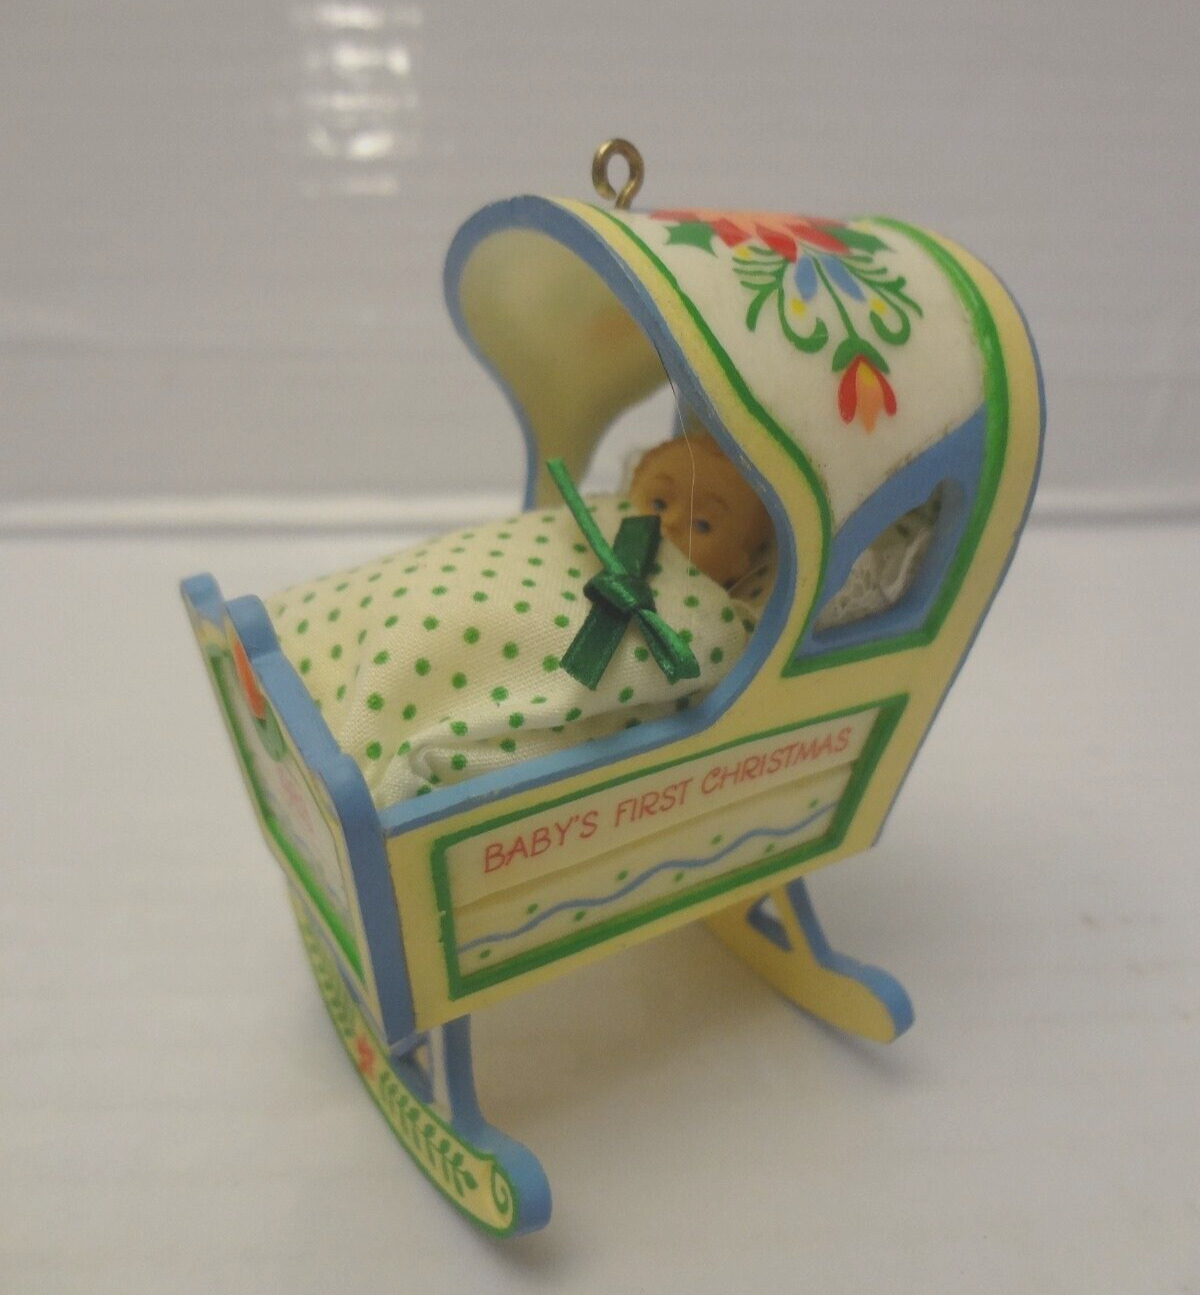 VTG 1983 Baby\'s First Christmas Cradle Hallmark Ornament Super Cute EXCELLENT